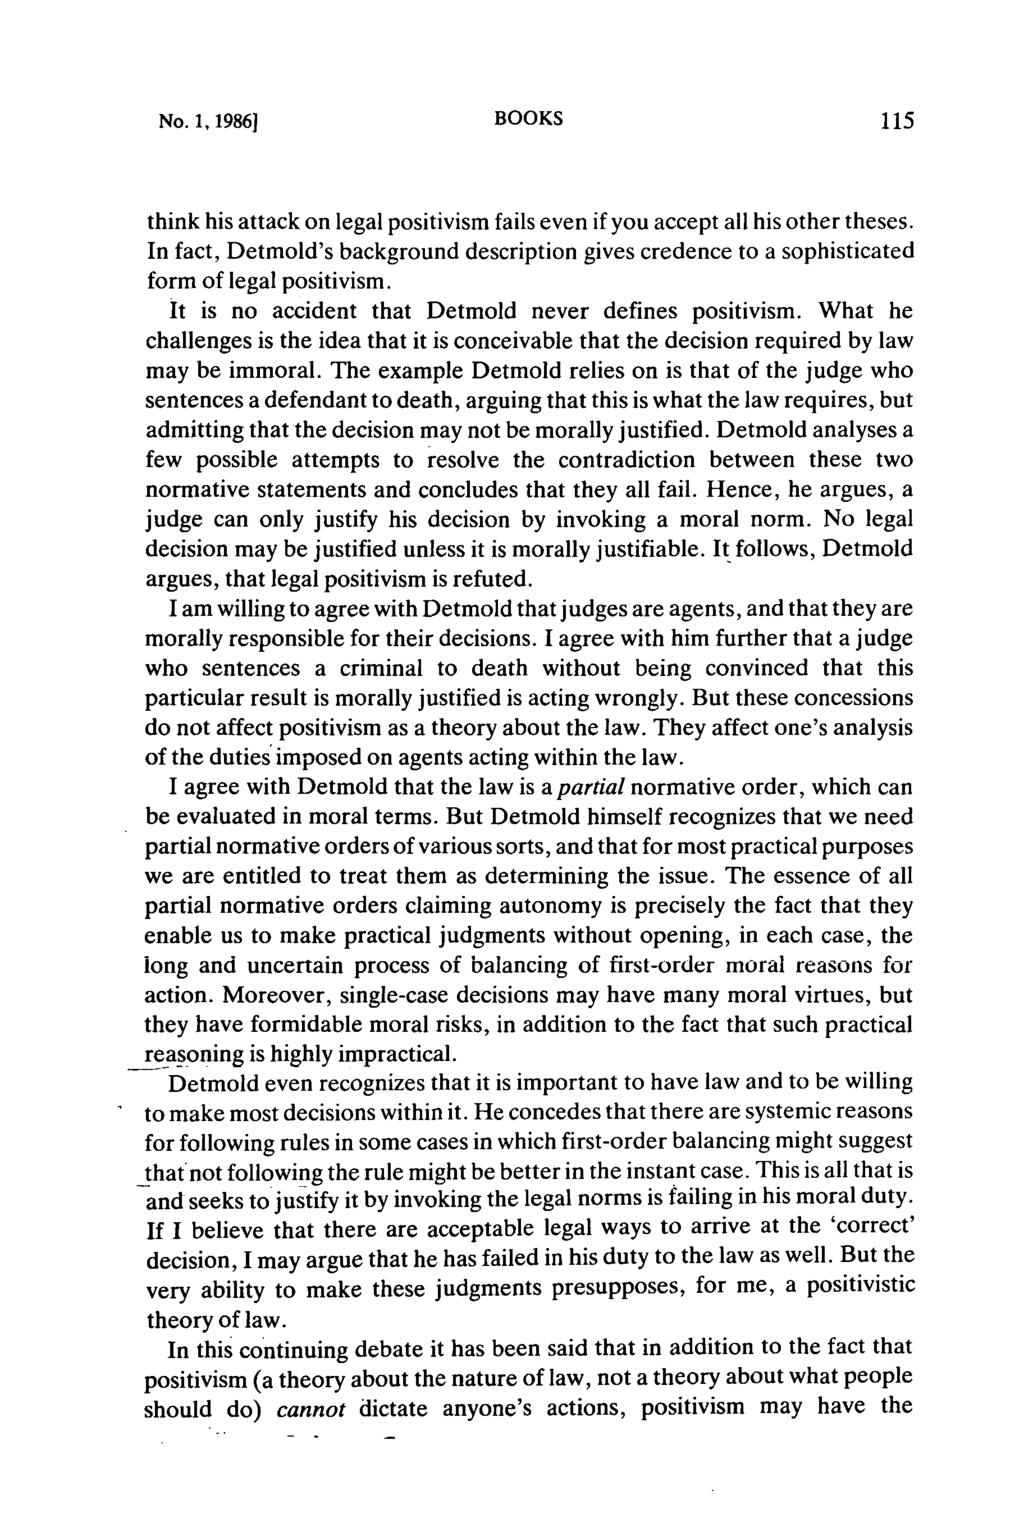 No. 1, 1986] BOOKS think his attack on legal positivism fails even if you accept all his other theses.